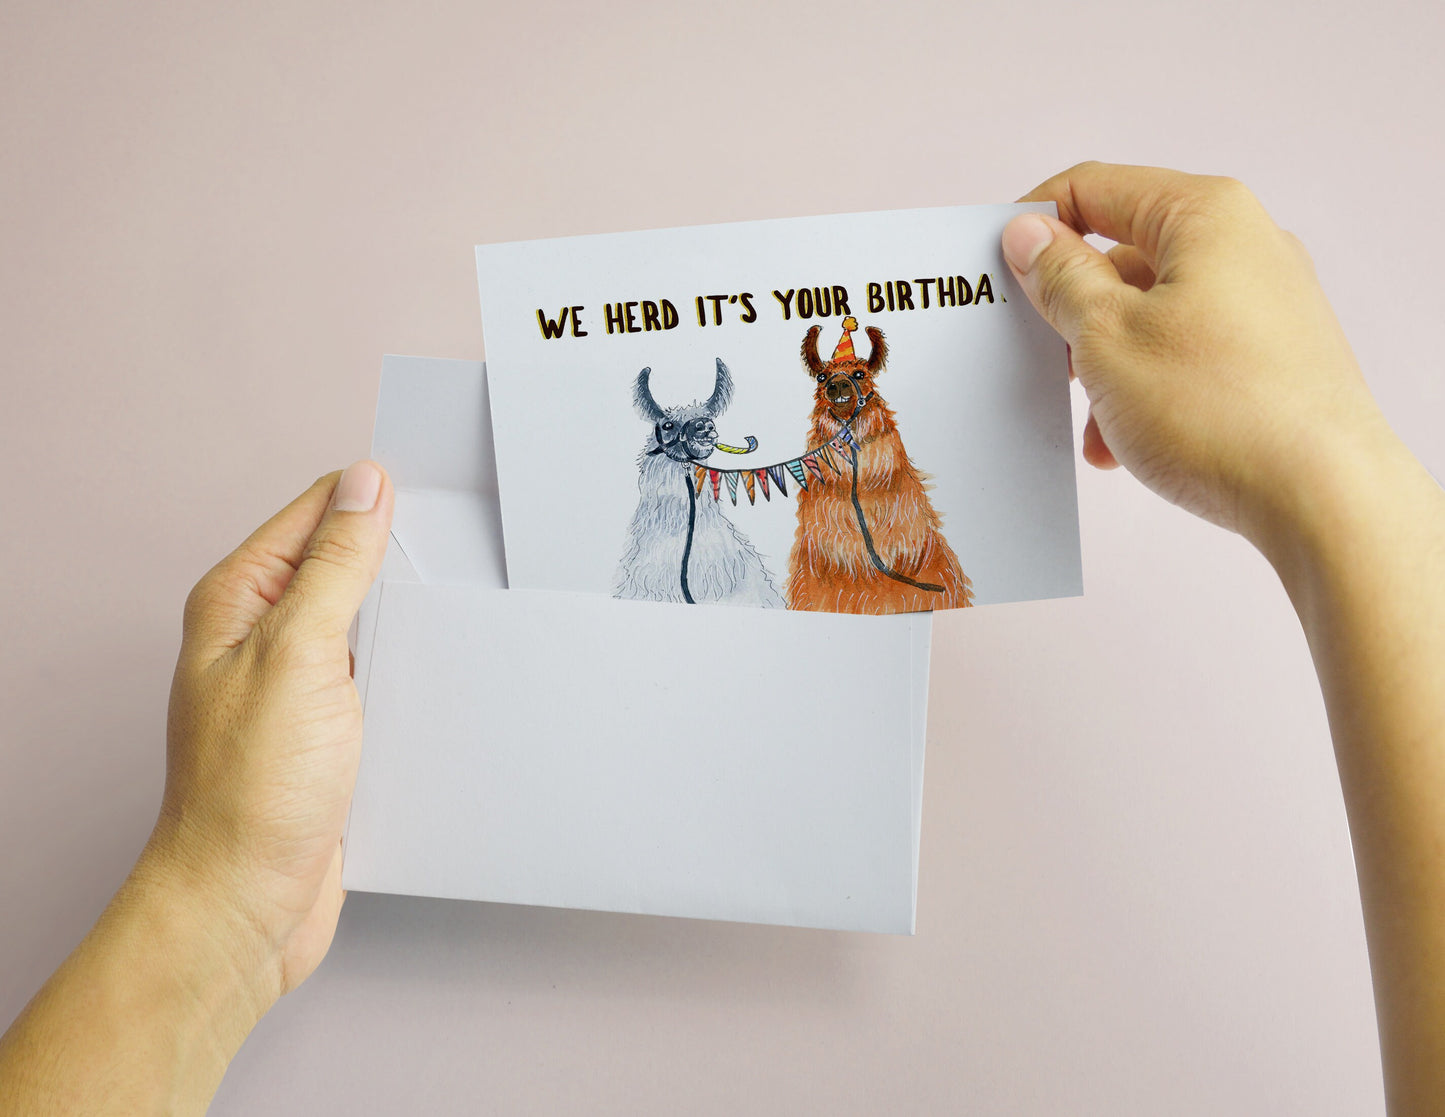 Llamas Couple Funny Birthday Card For Friend - We Herd It's Your Birthday